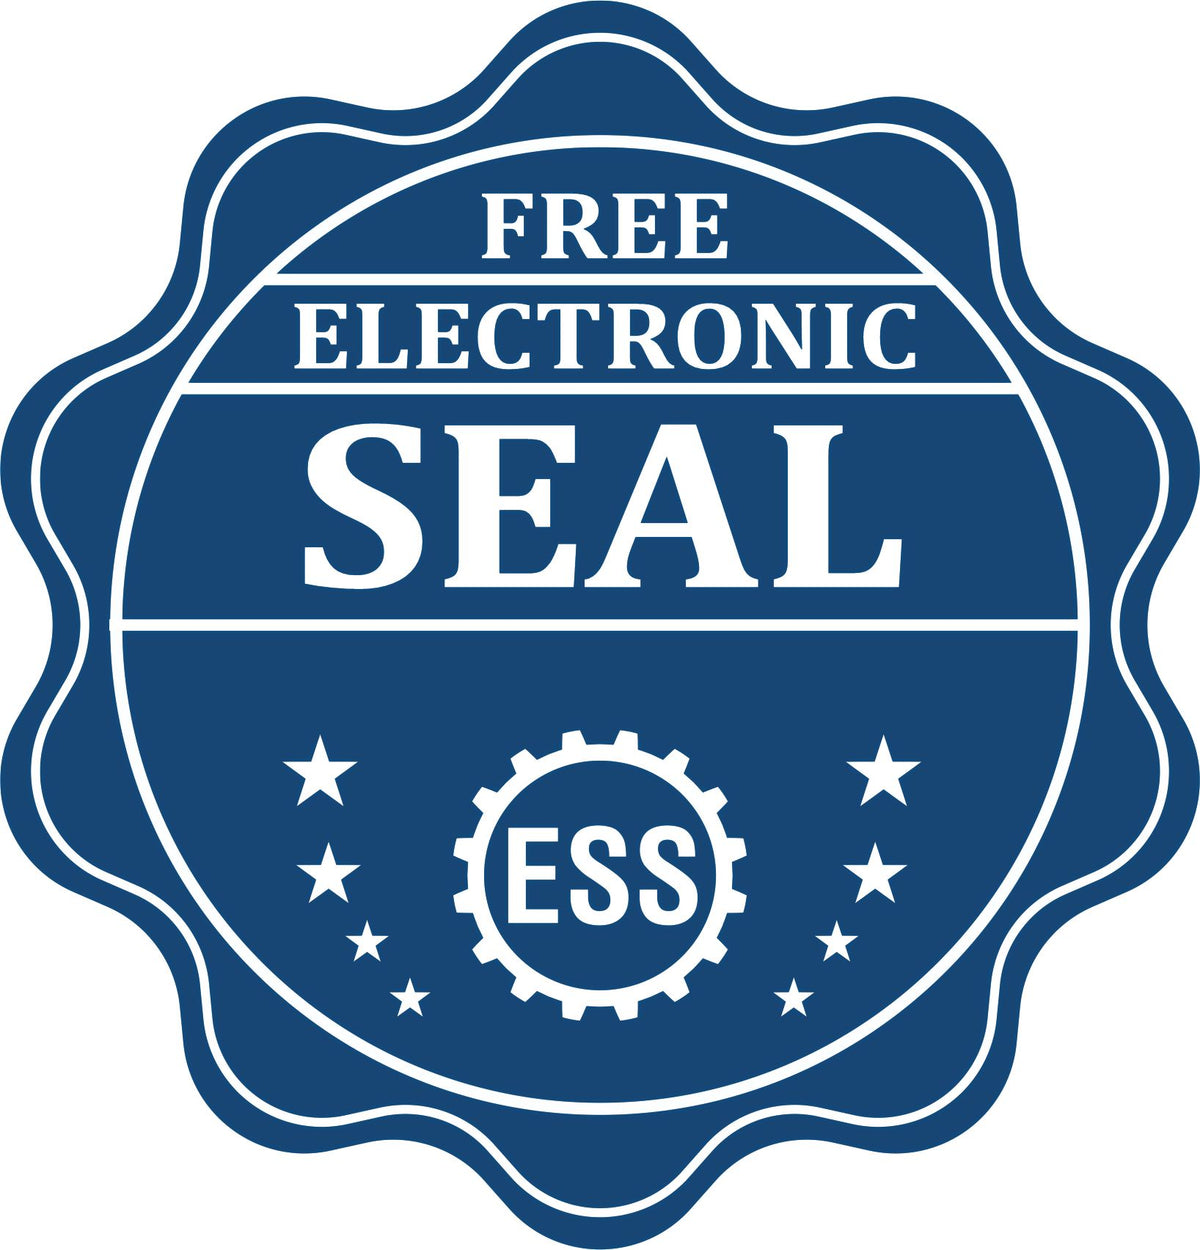 A badge showing a free electronic seal for the Soft Pocket New Jersey Landscape Architect Embosser with stars and the ESS gear on the emblem.